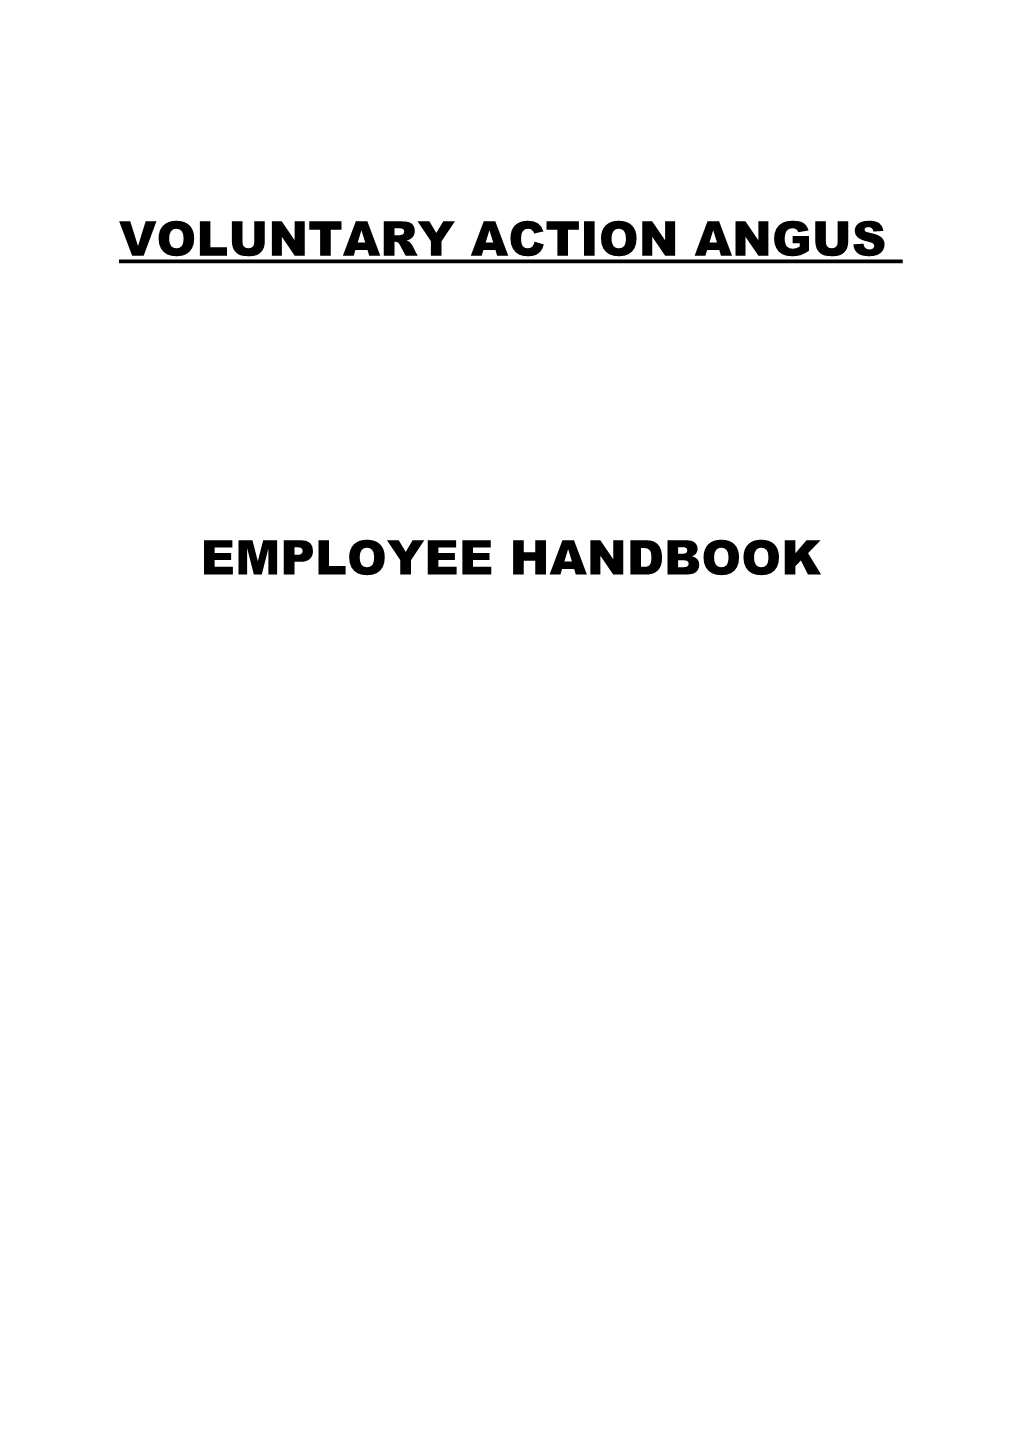 Voluntary Action Angus